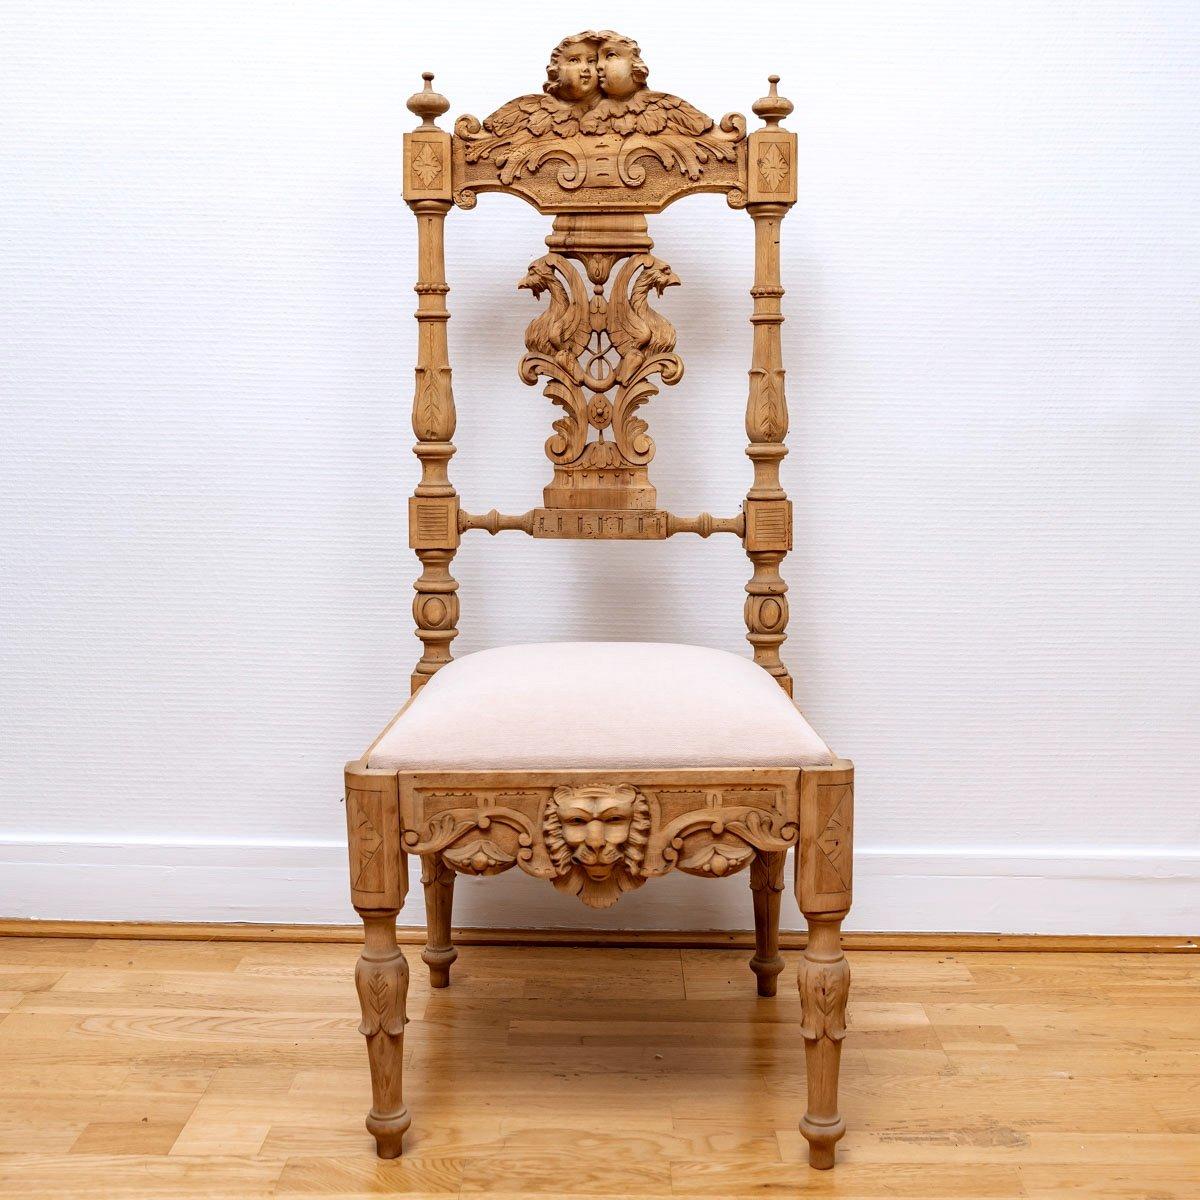 Charming entrance chair in solid walnut.
This very beautiful realization, unique piece of a complete living room, was realized in Italy, in the region of Piedmont whose multiple localities always offer a testimony of the past. History has left its